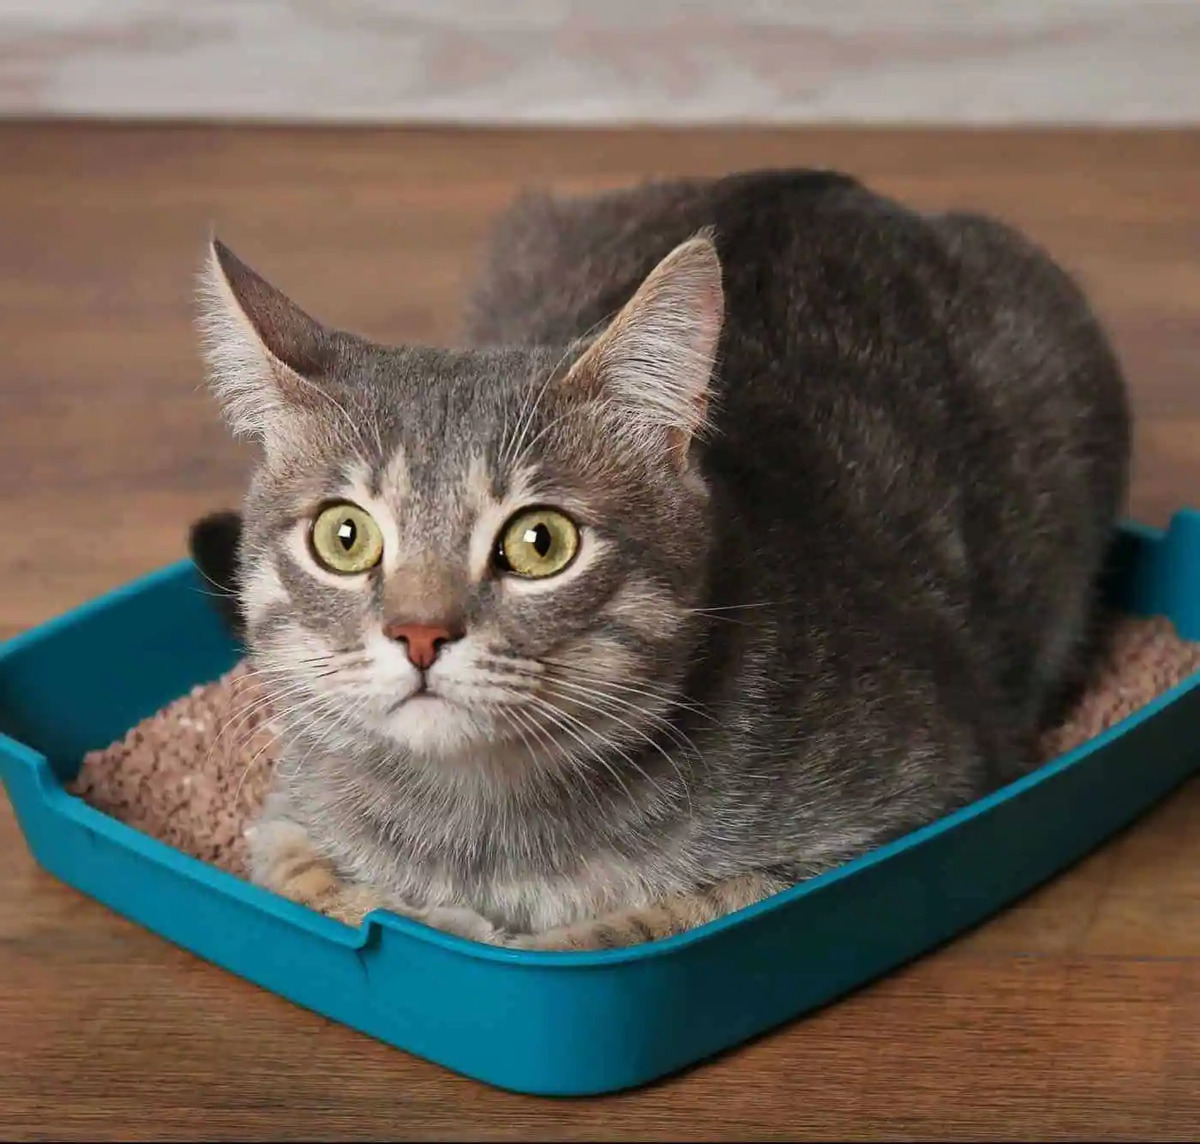 What Age Do Kittens Use A Litter Box?